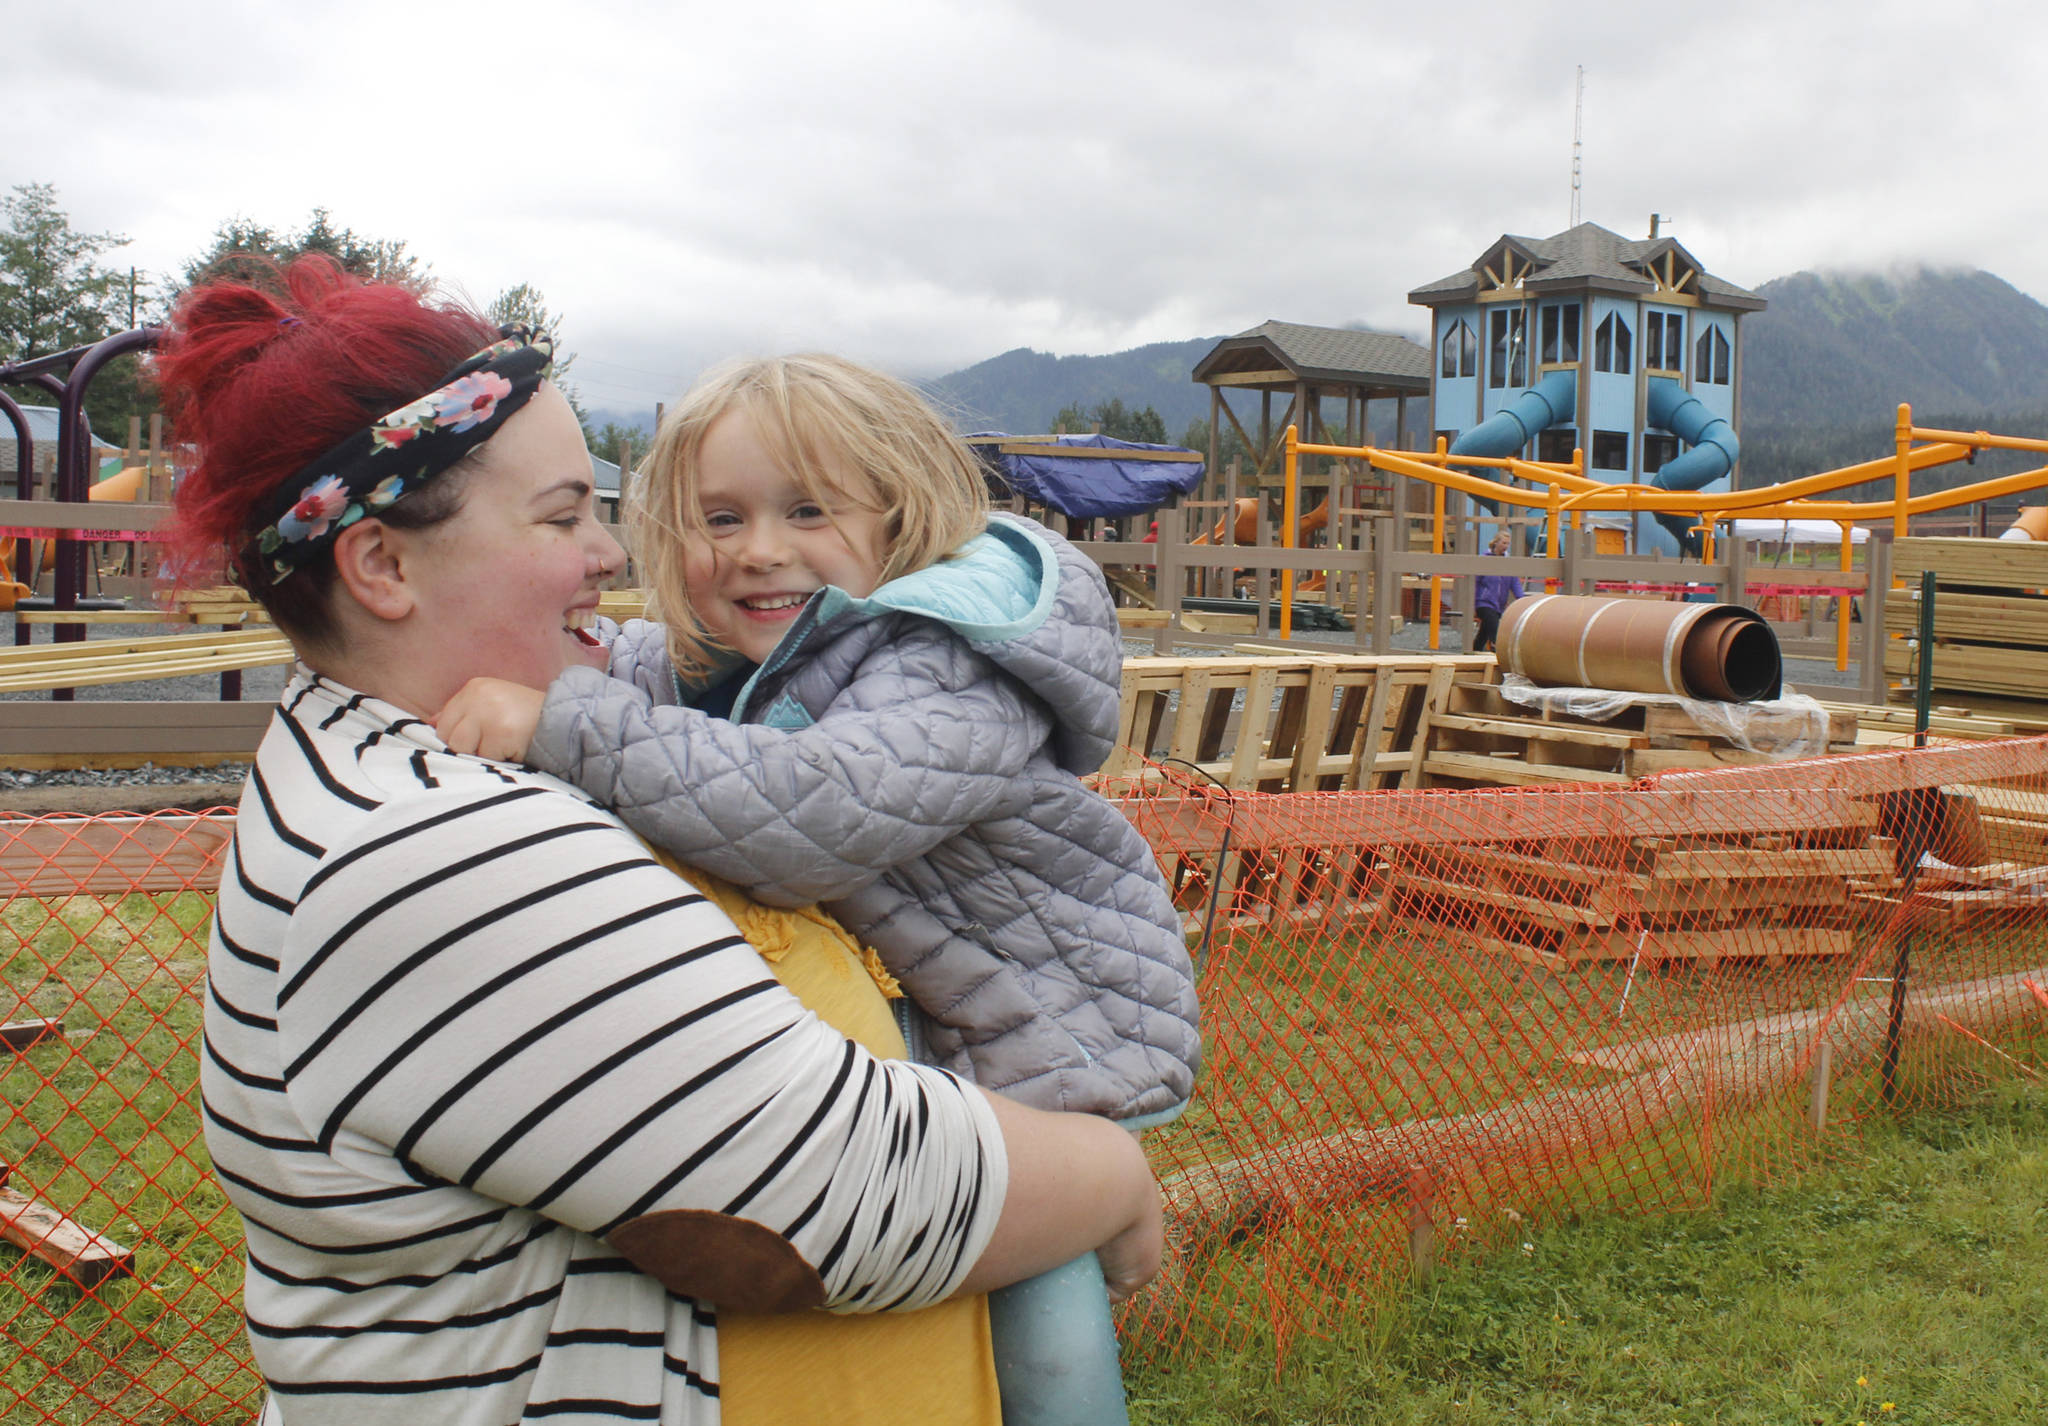 Lilah Gaguine, 4, laughs as her mother Becca holds her near Project Playground on the first day of the community build, Aug. 8, 2018. Lilah saved up her allowance for a year to donate to the rebuild, and was invited as an honorary volunteer. (Alex McCarthy | Juneau Empire)